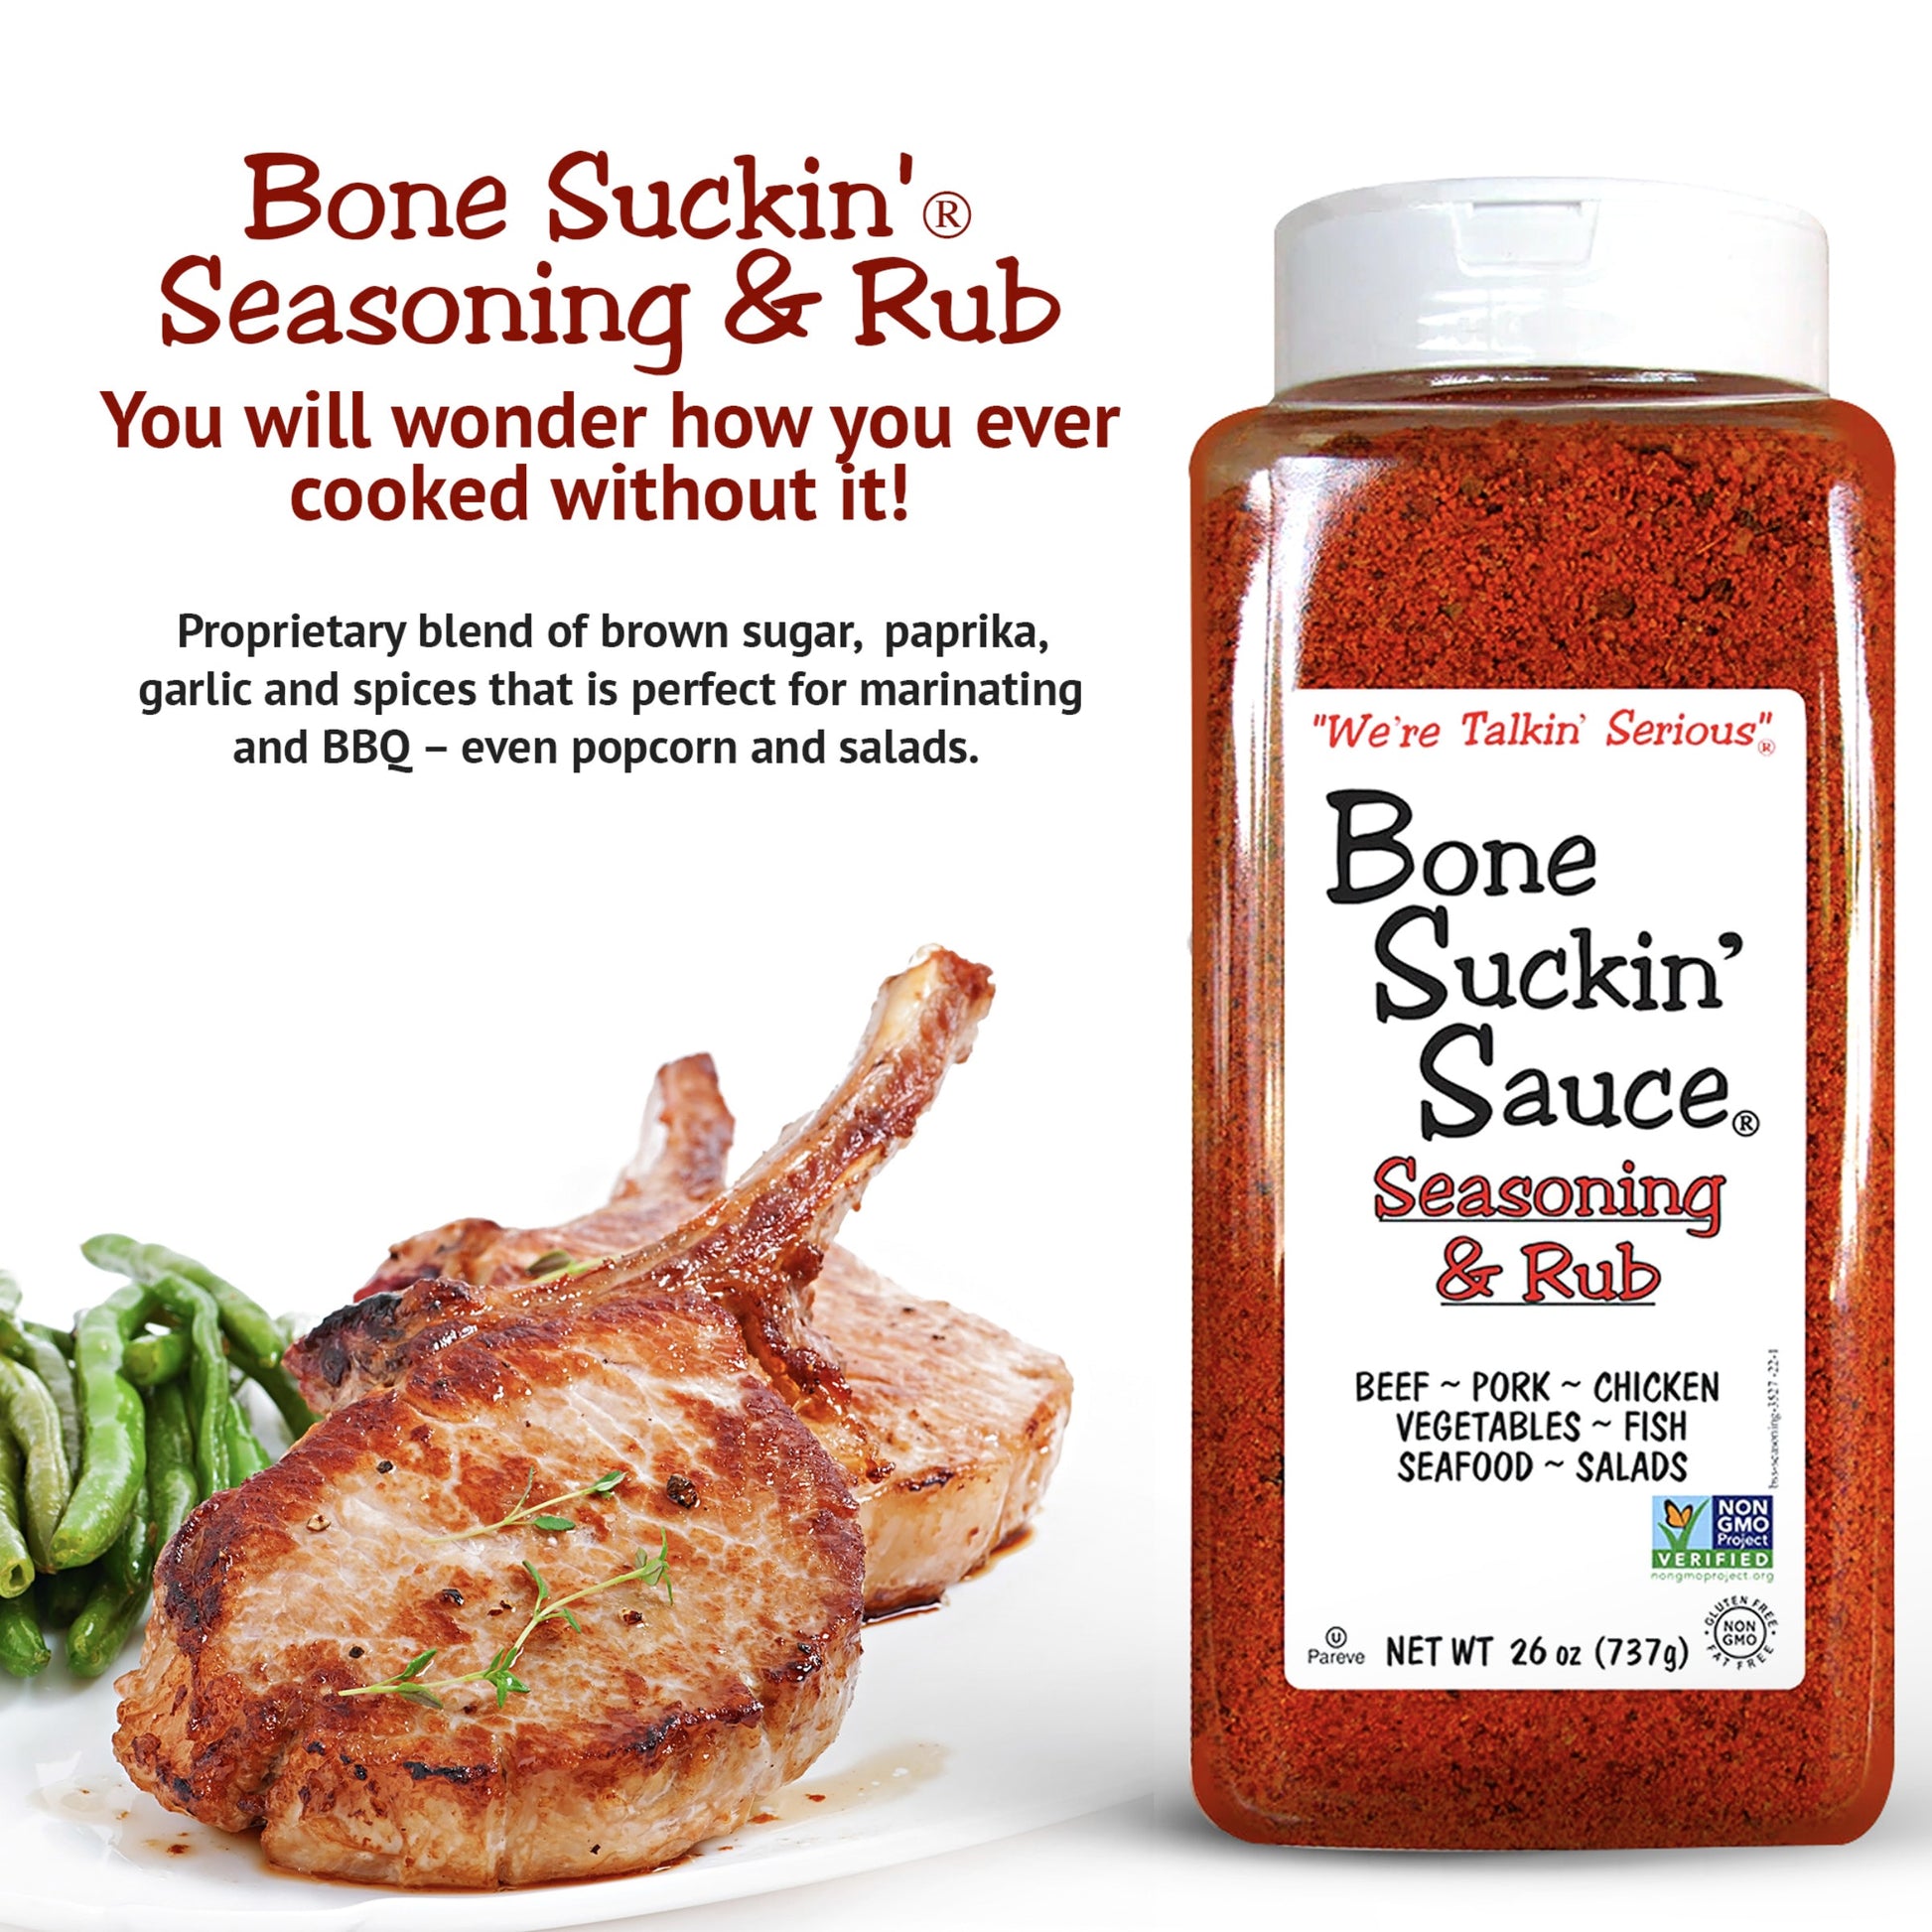 Bone Suckin’® Seasoning & Rub, 26 oz. You will wonder how you ever cooked without it. Proprietary blend of brown sugar, paprika, garlic and spices that is perfect for marinating and BBQ-even popcorn and salads. 